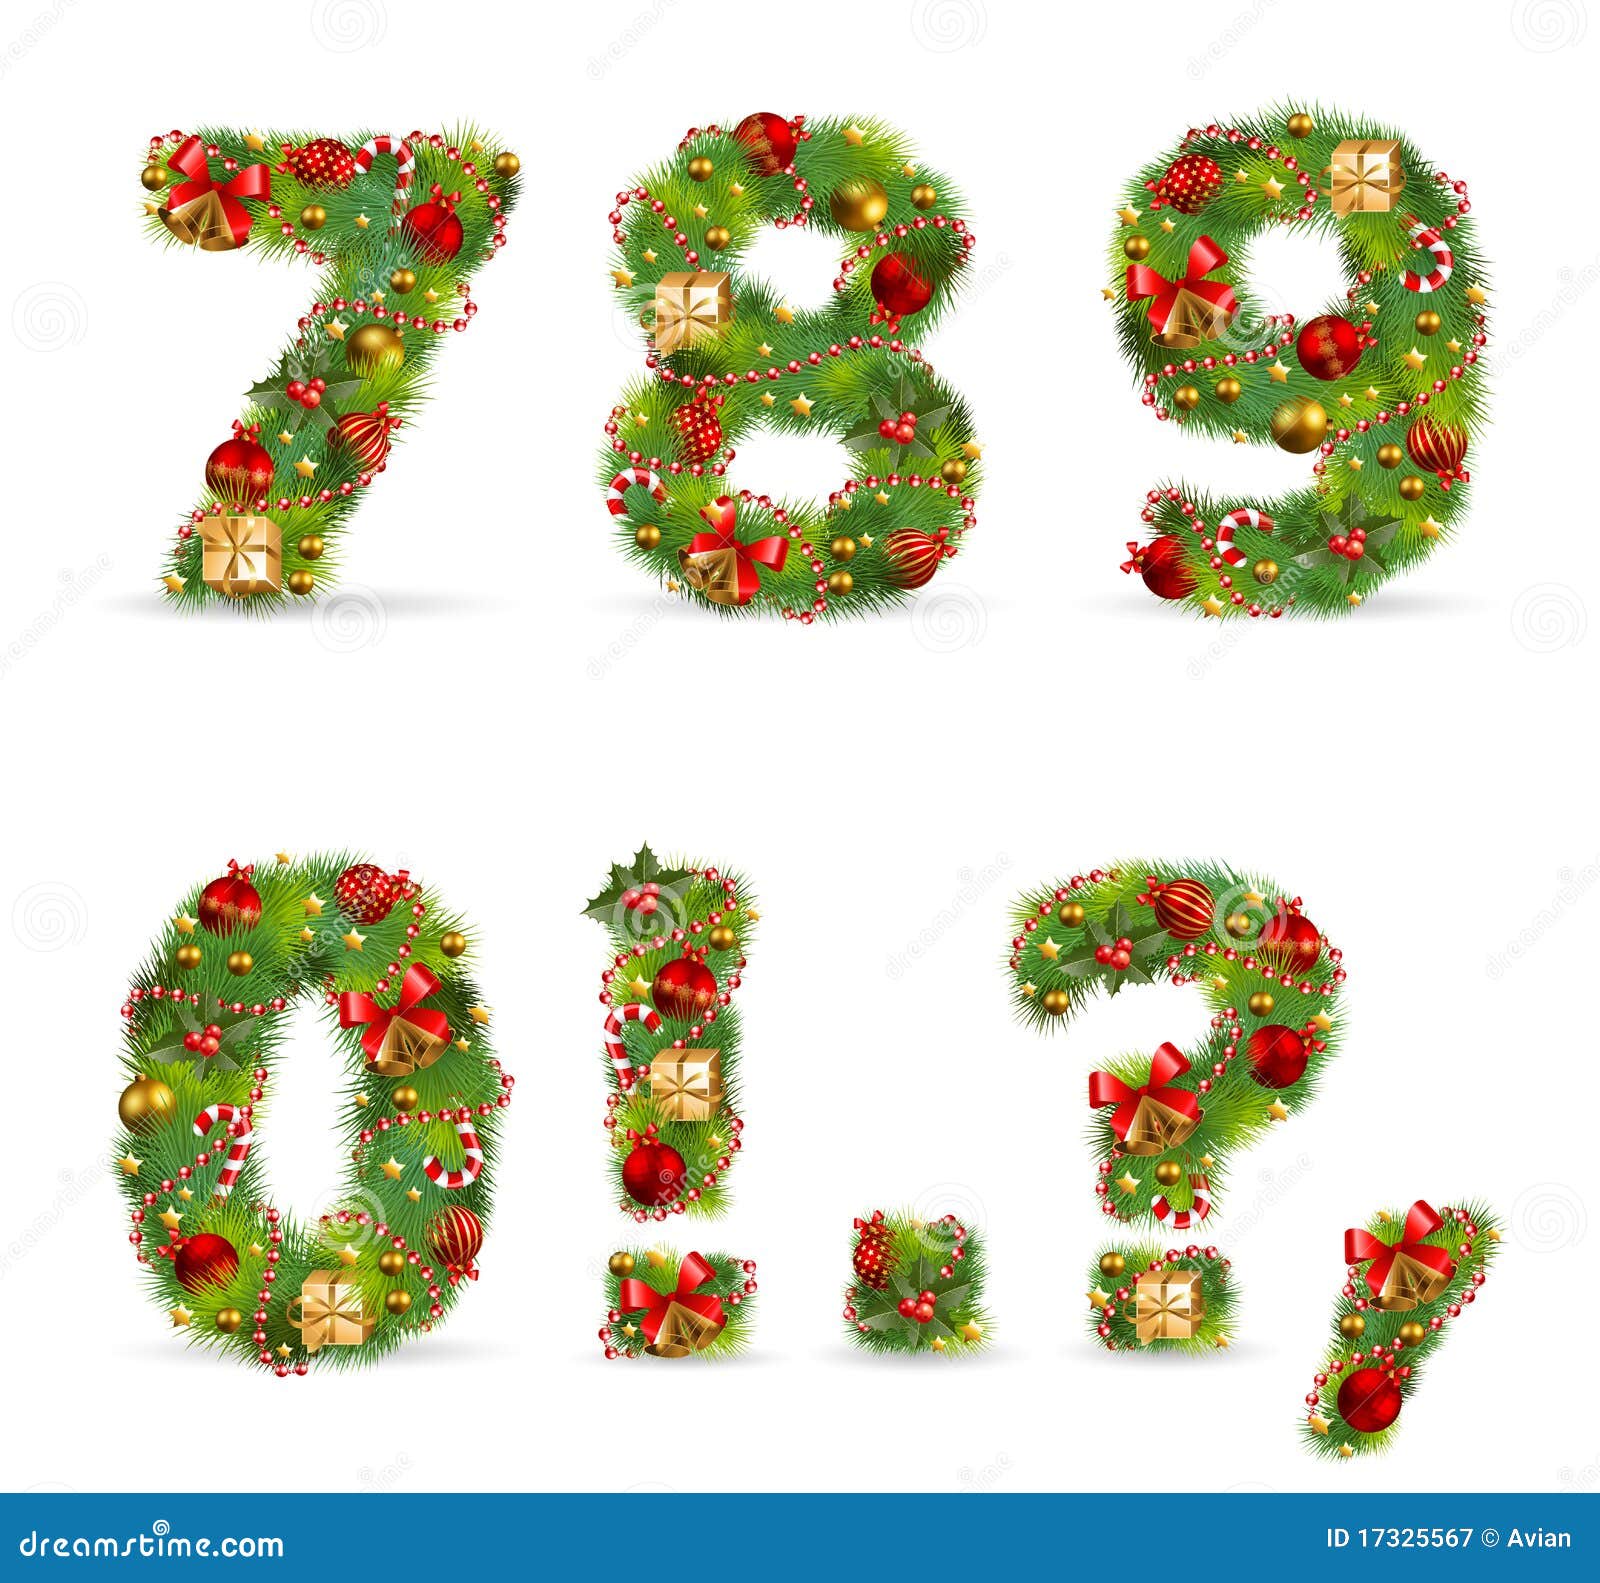 abcdef, christmas tree font